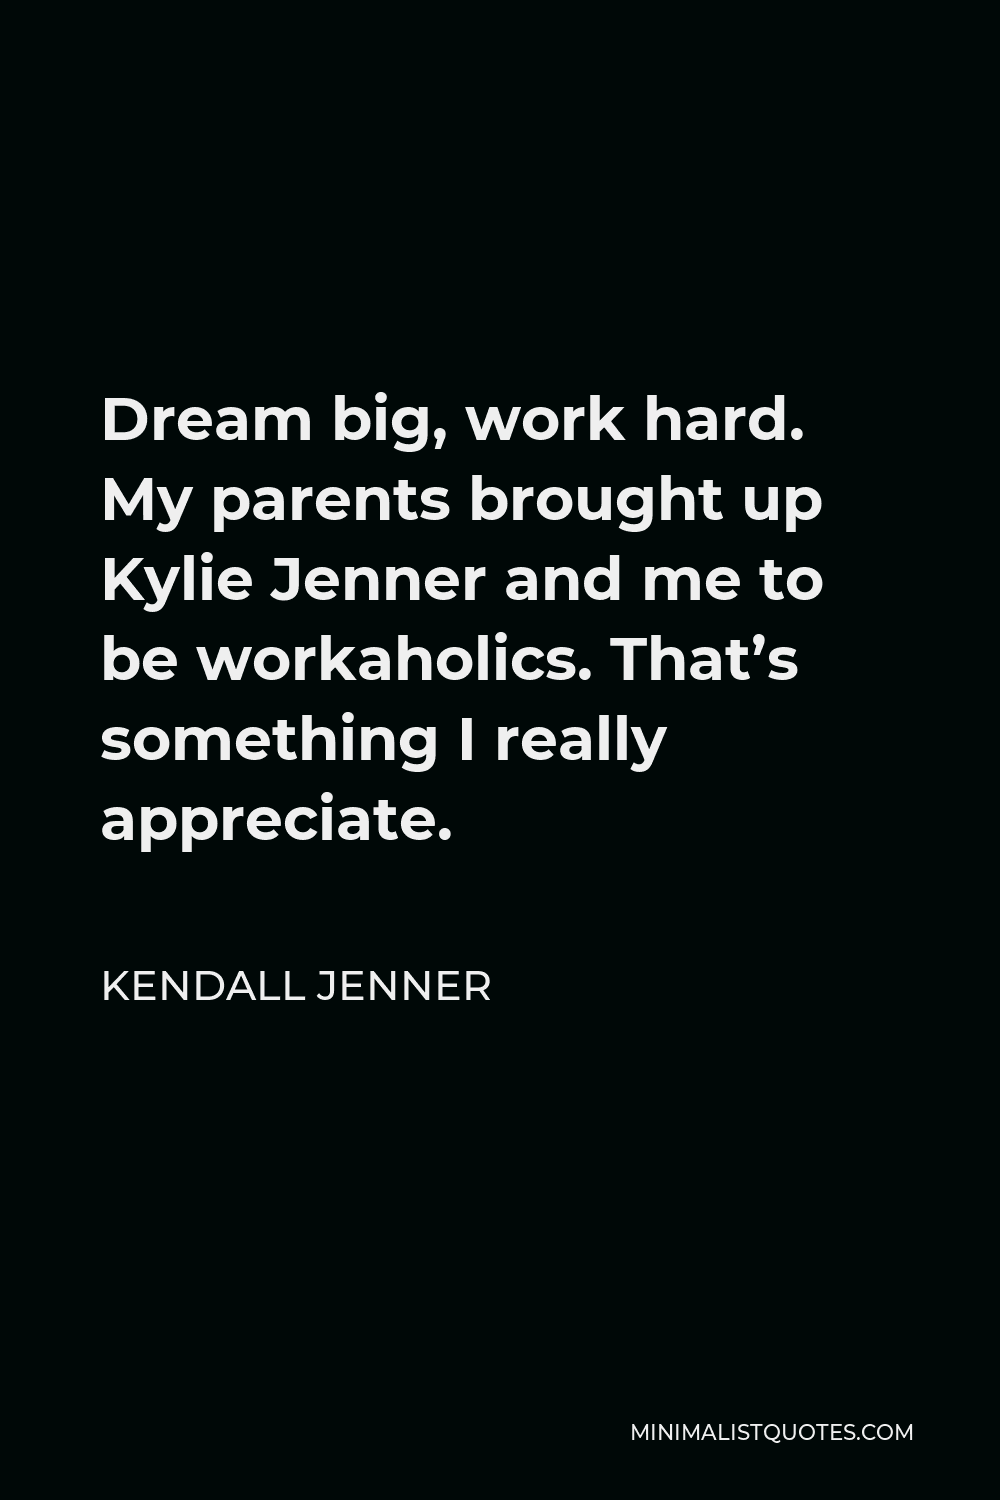 Kendall Jenner Quote - Dream big, work hard. My parents brought up Kylie Jenner and me to be workaholics. That’s something I really appreciate.